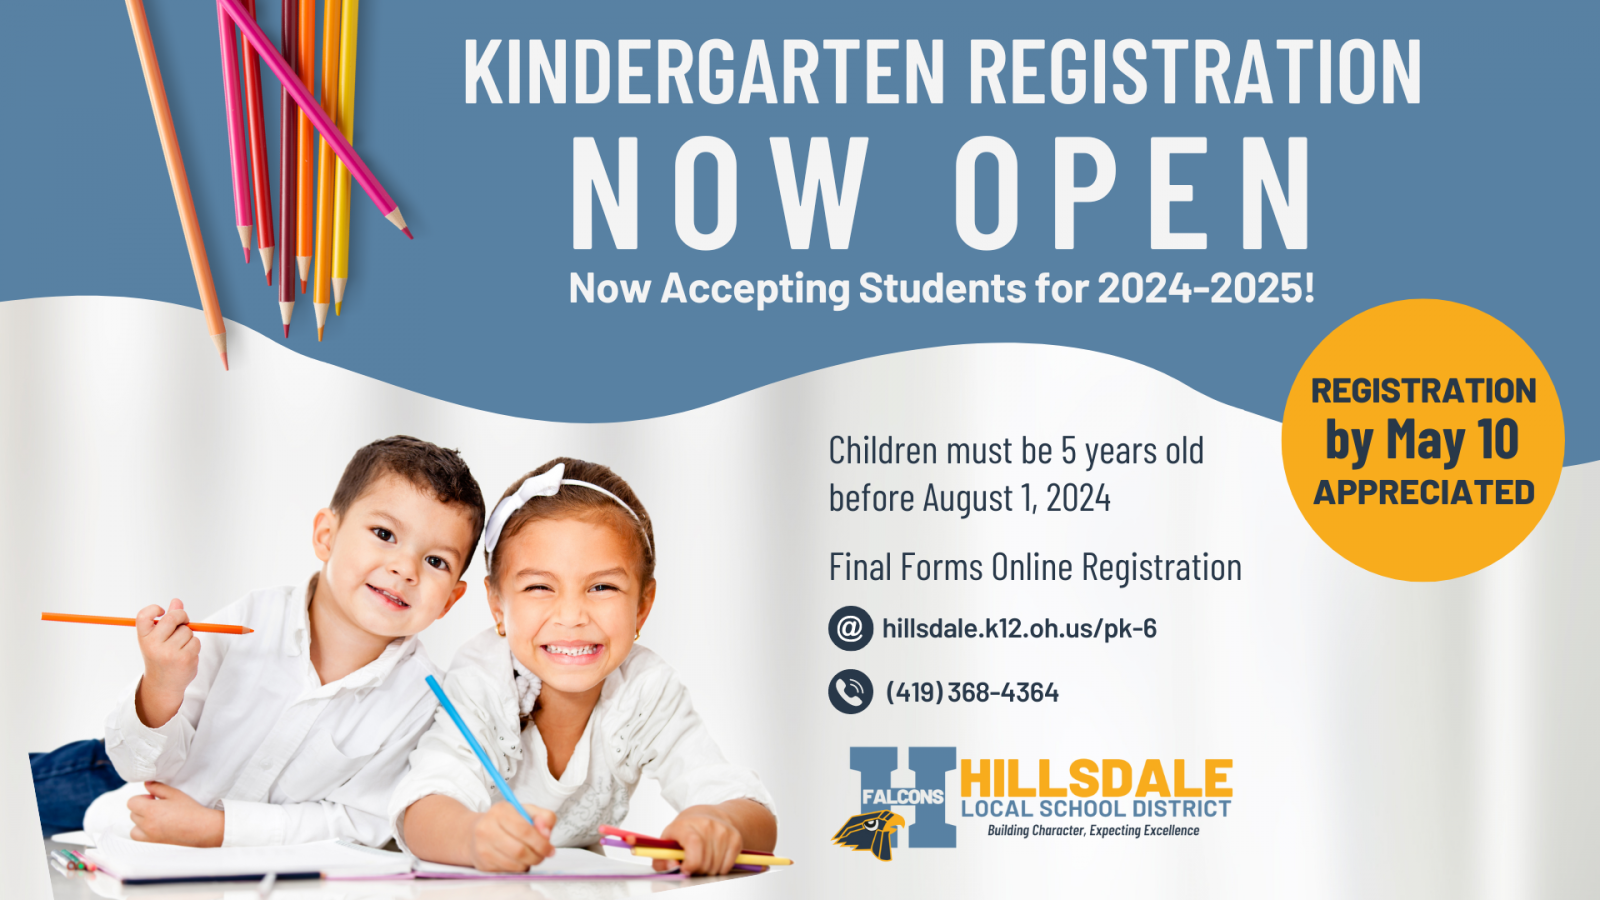 Kindergarten registration is open for the 2024-2025 school year for children who are 5 before August 1, 2024. Please register by May 10, 2024.